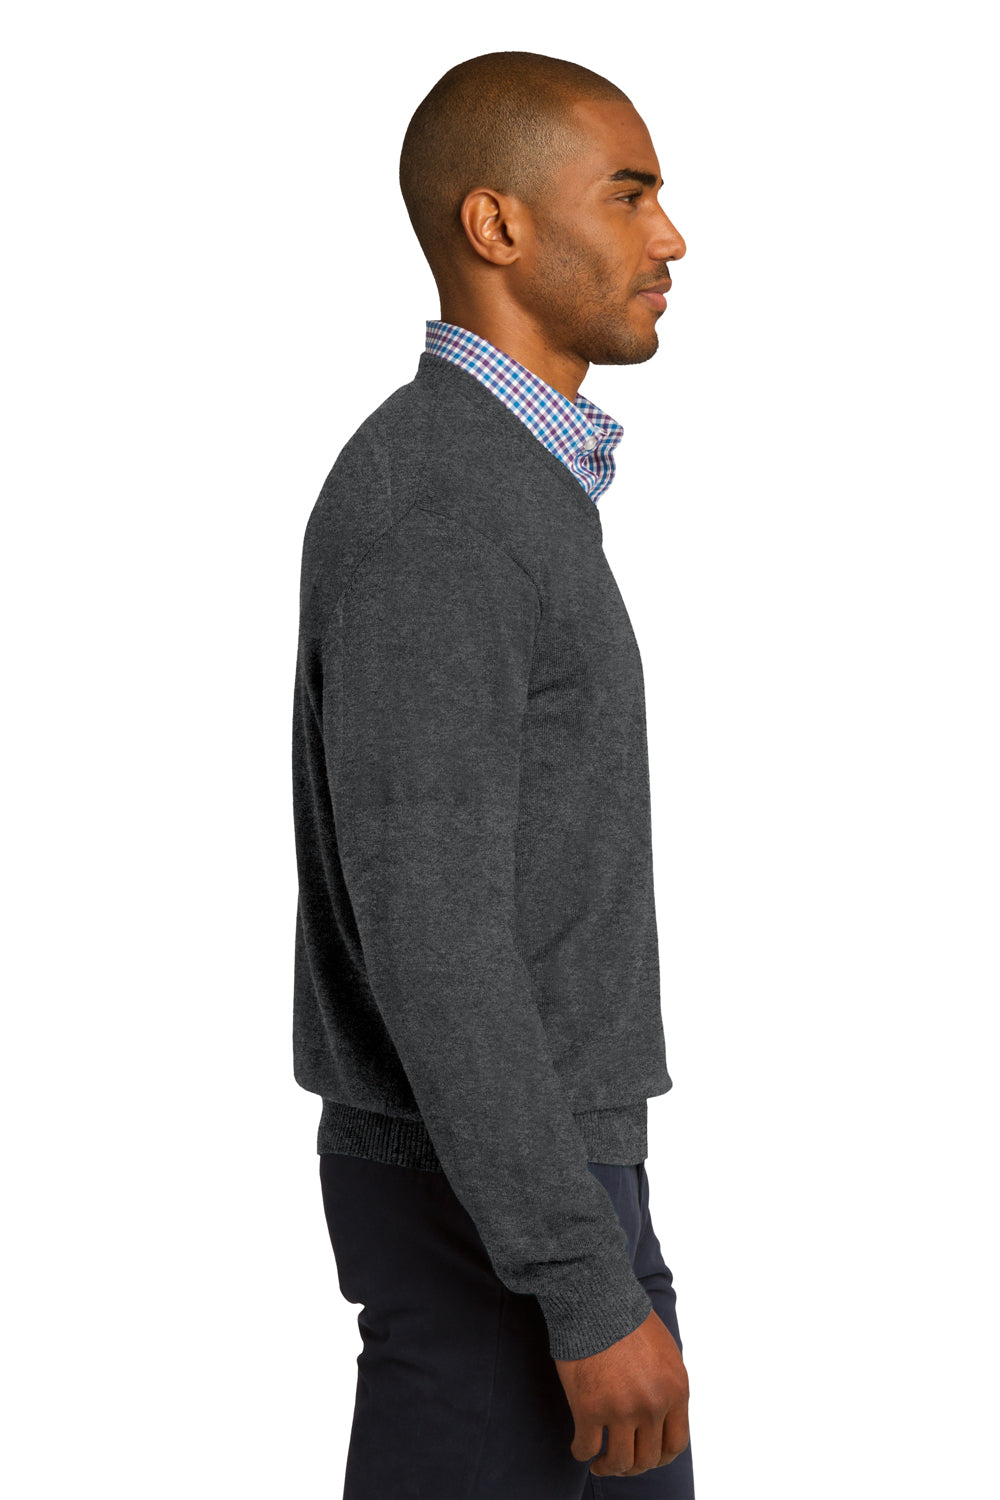 Port Authority SW285 Mens Long Sleeve V-Neck Sweater Heather Charcoal Grey Side